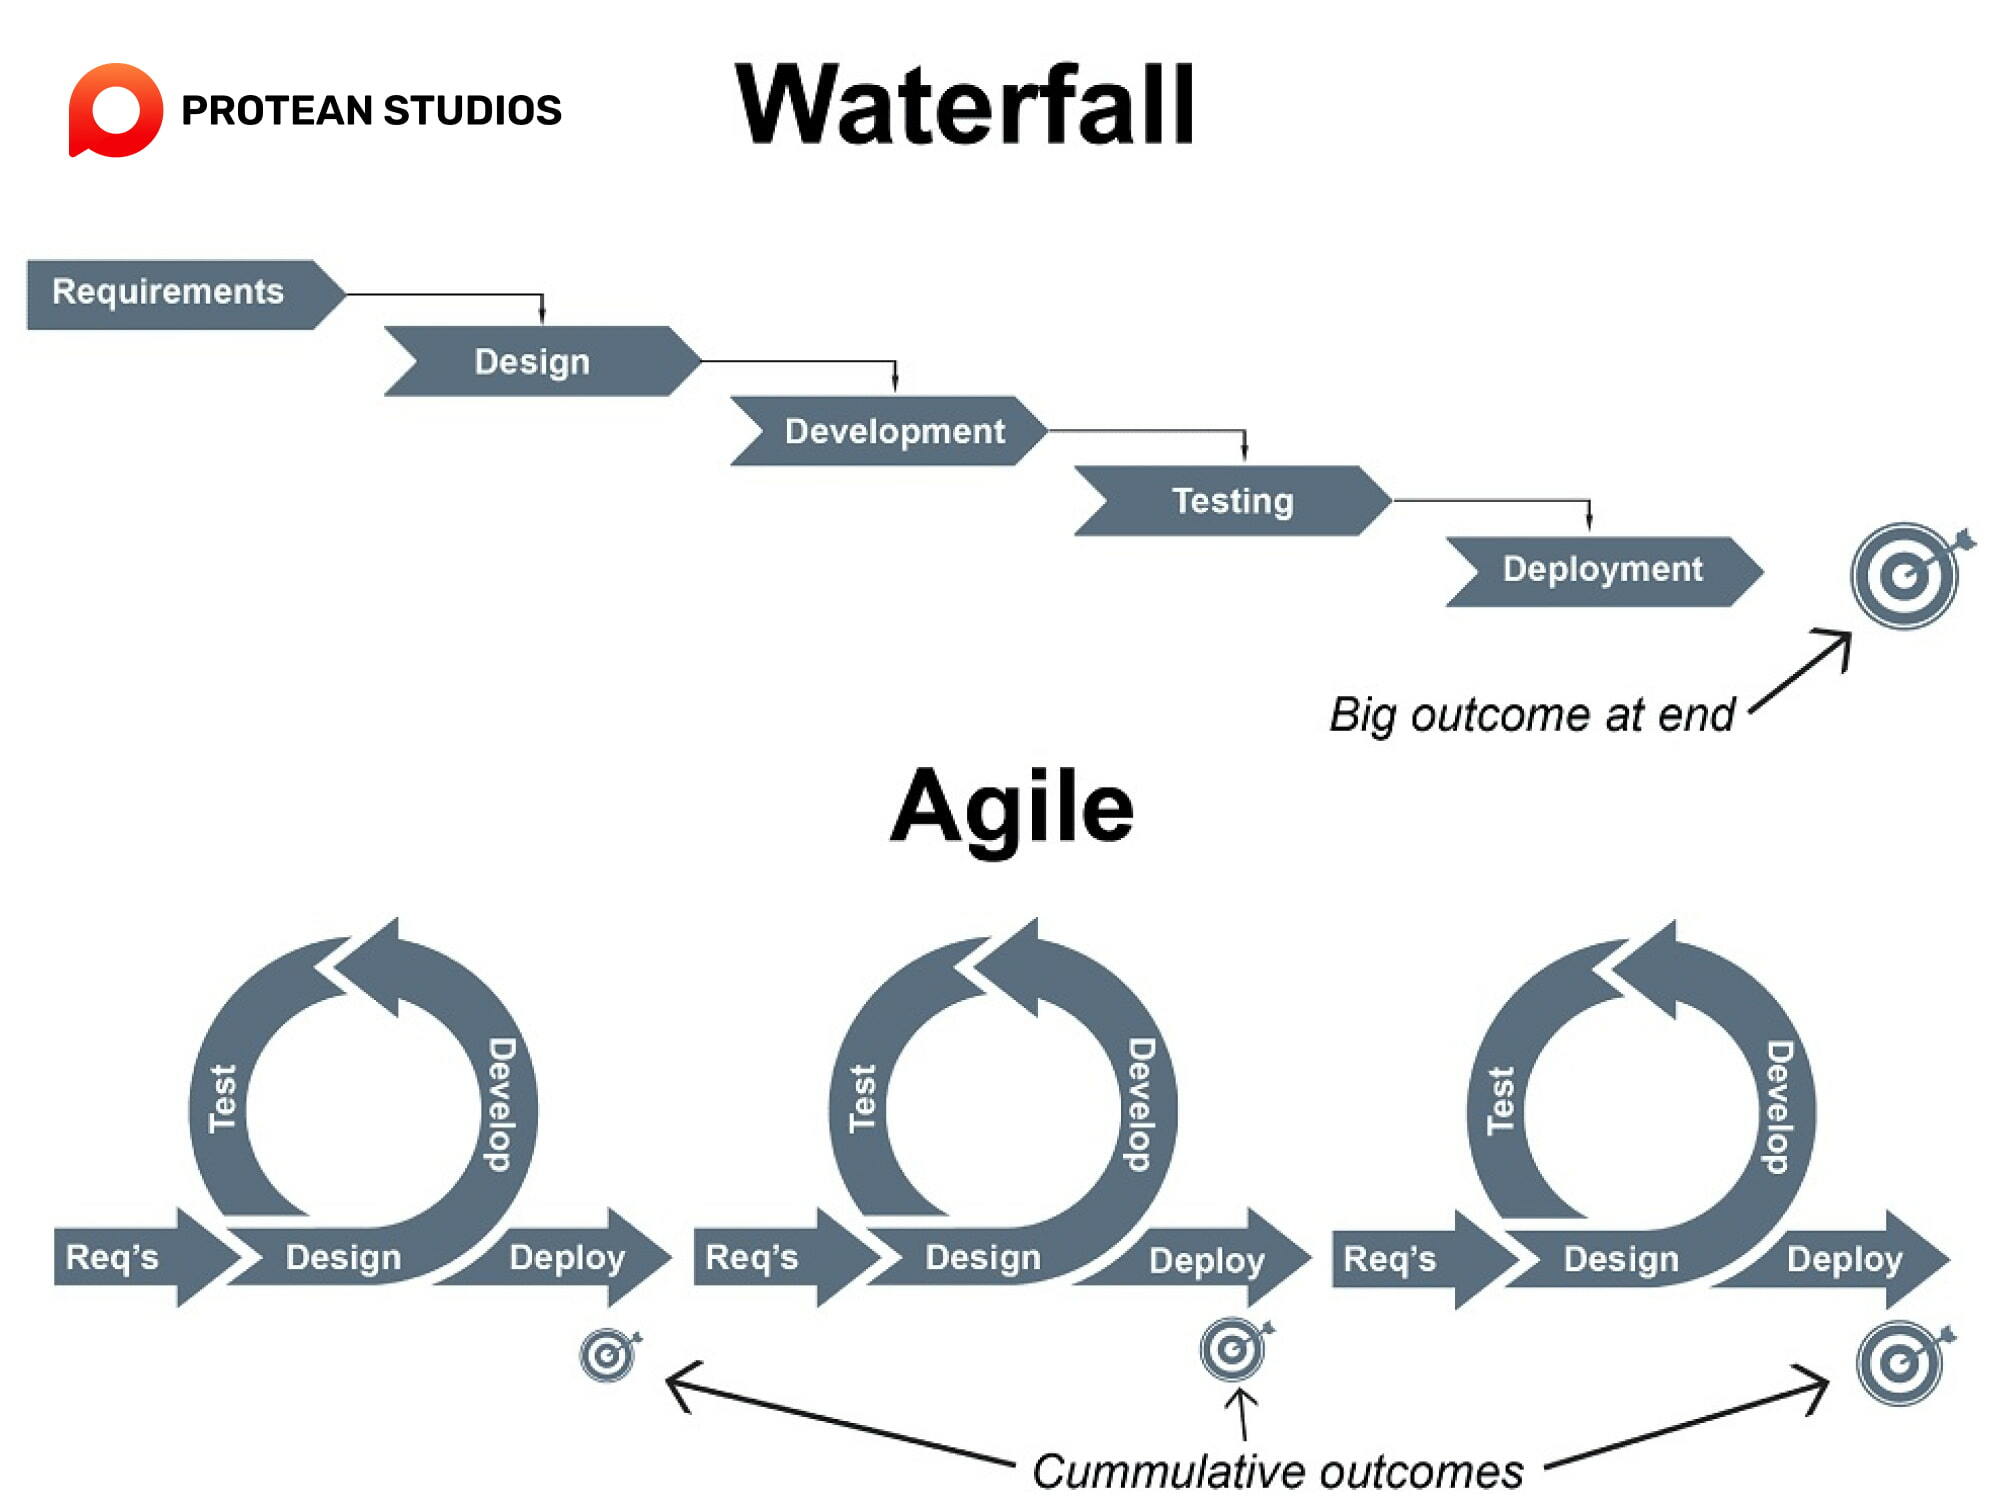 The hybrid method combines waterfall and agile